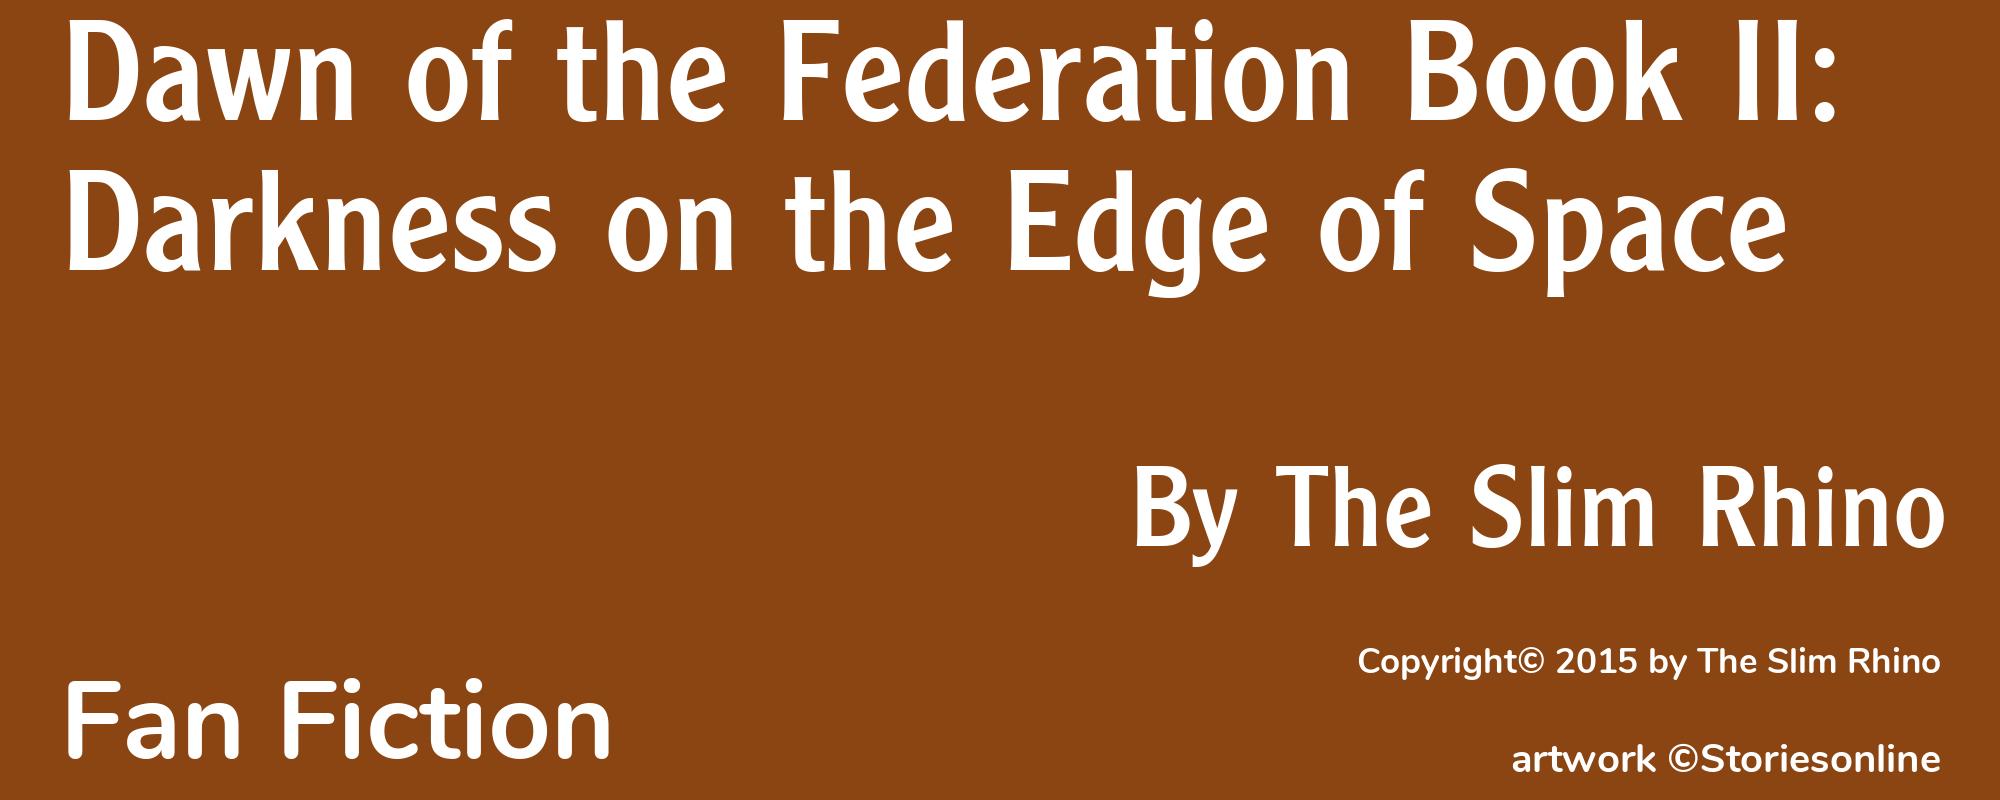 Dawn of the Federation Book II: Darkness on the Edge of Space - Cover